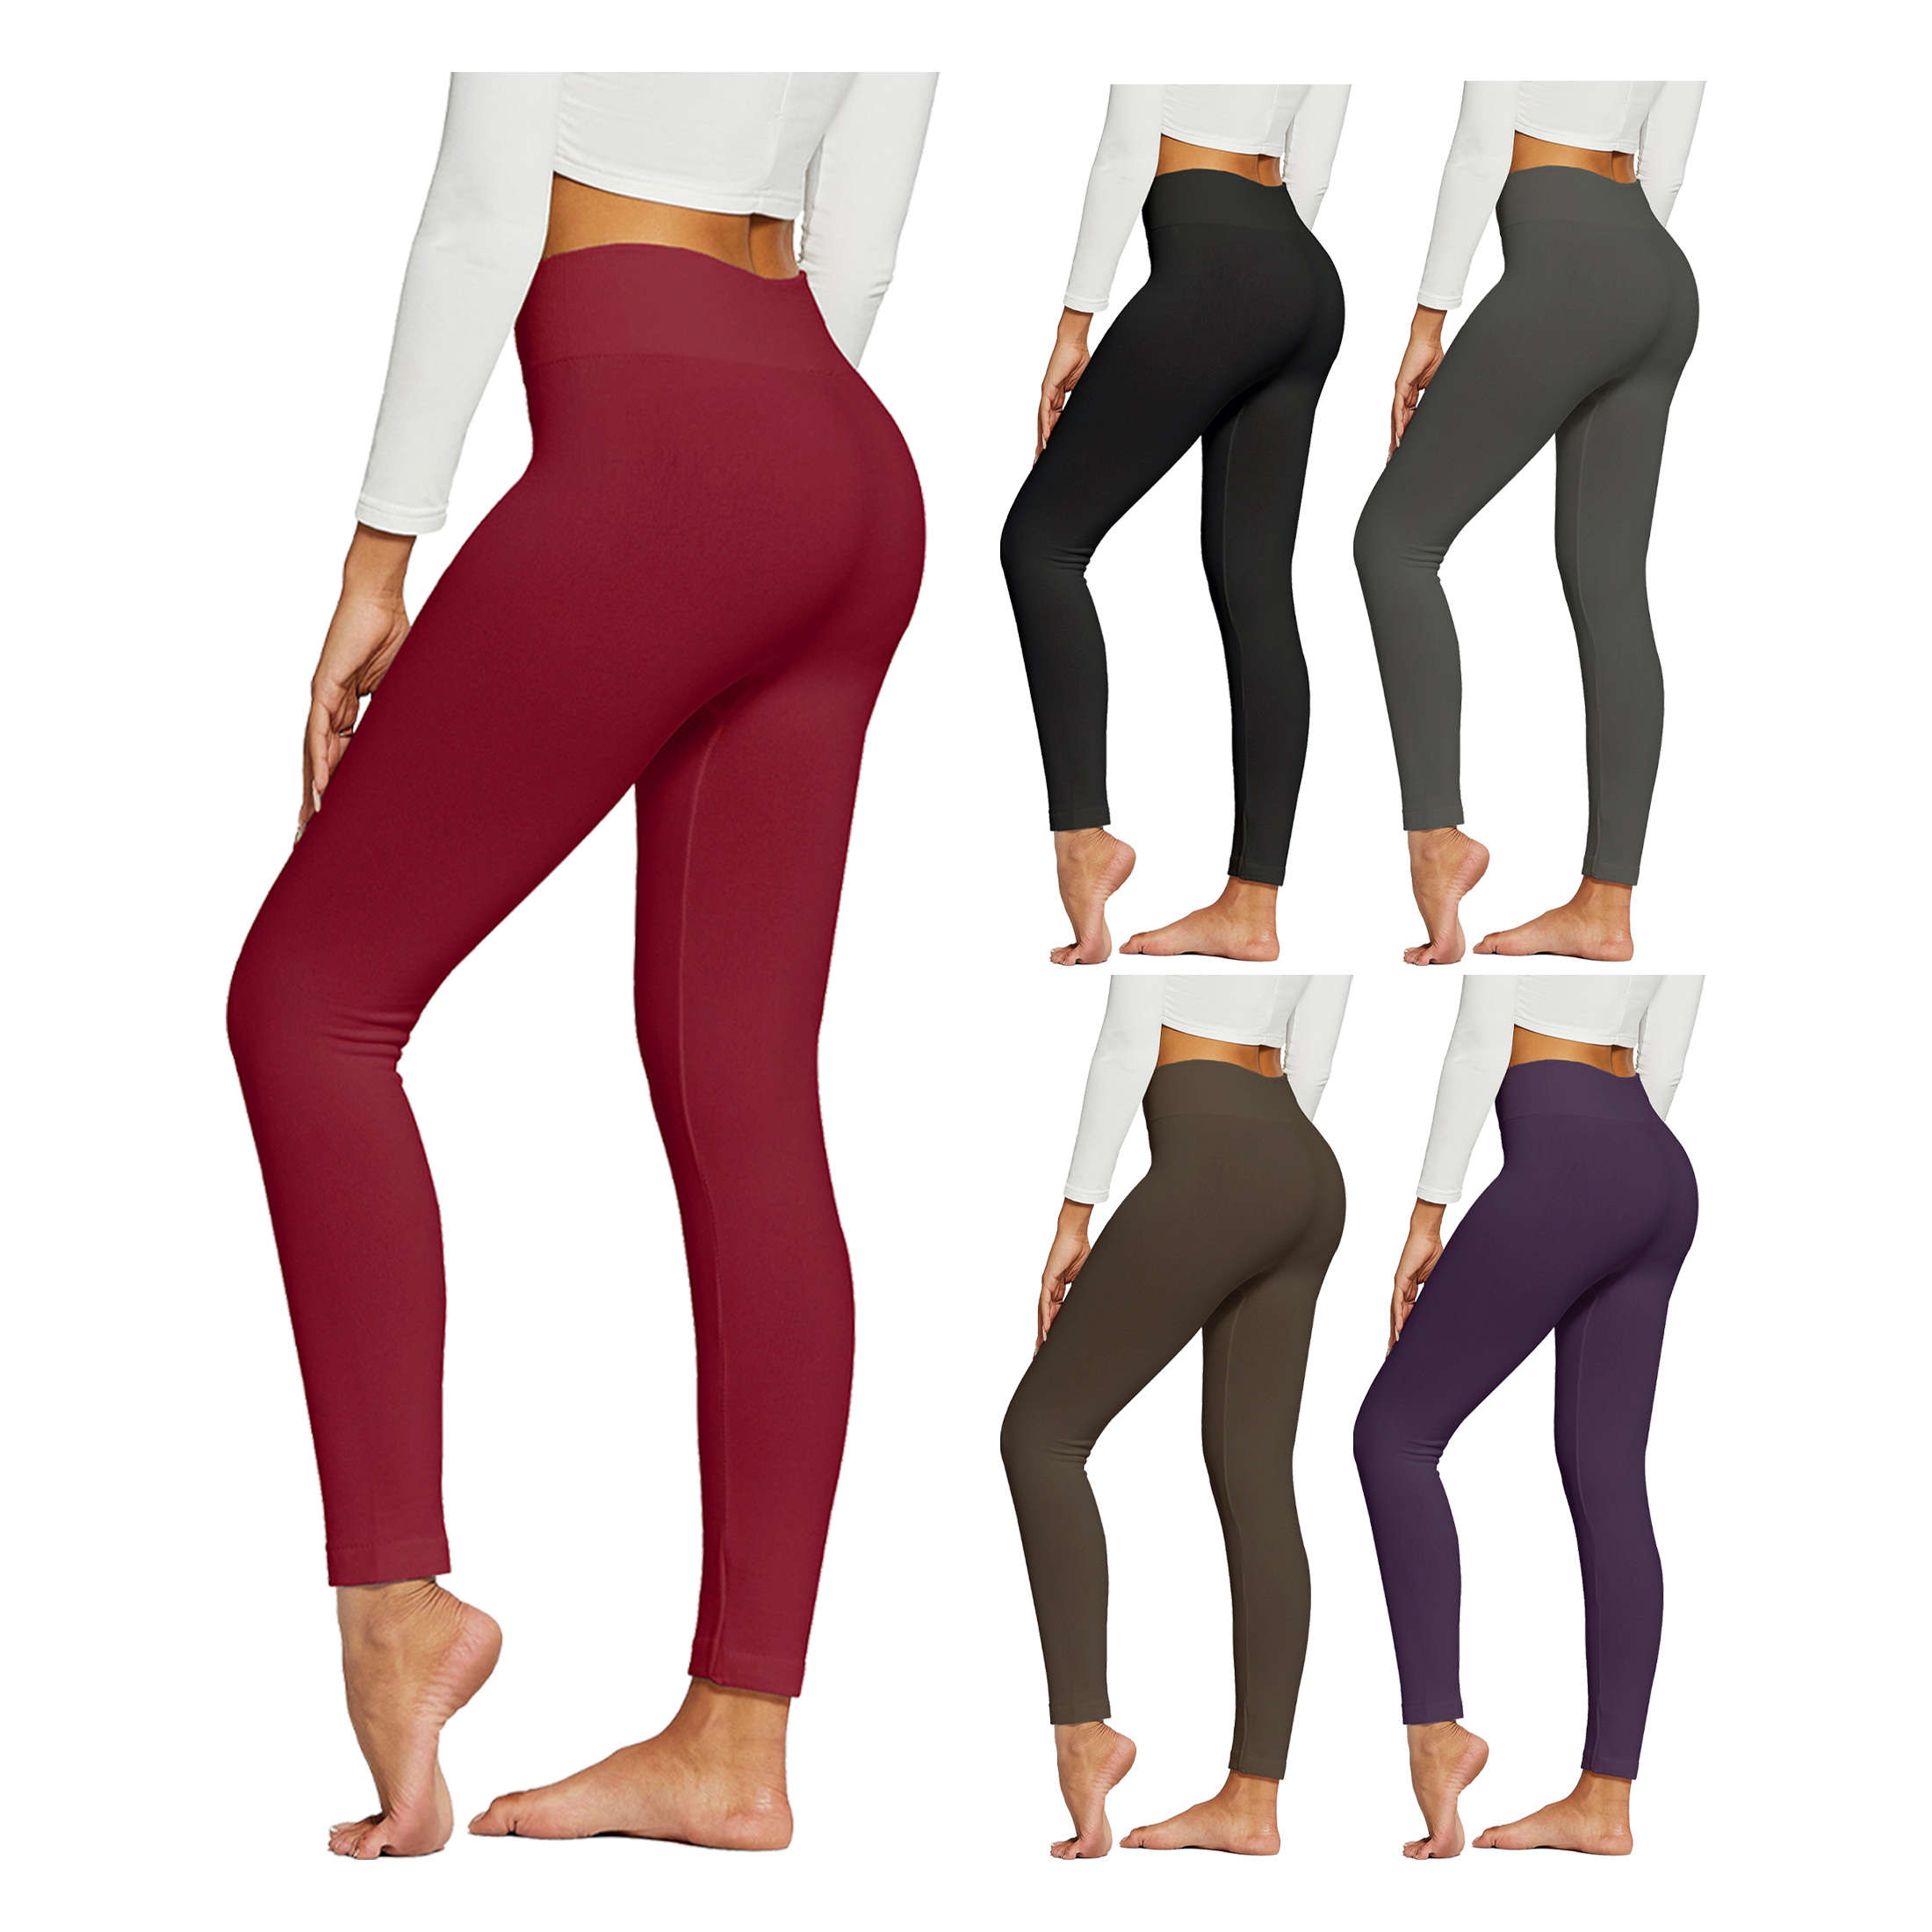 4-Pack:Women's Premium Quality High-Waist Fleece-Lined Leggings (Plus Size Available) - Assorted, Large/X-Large